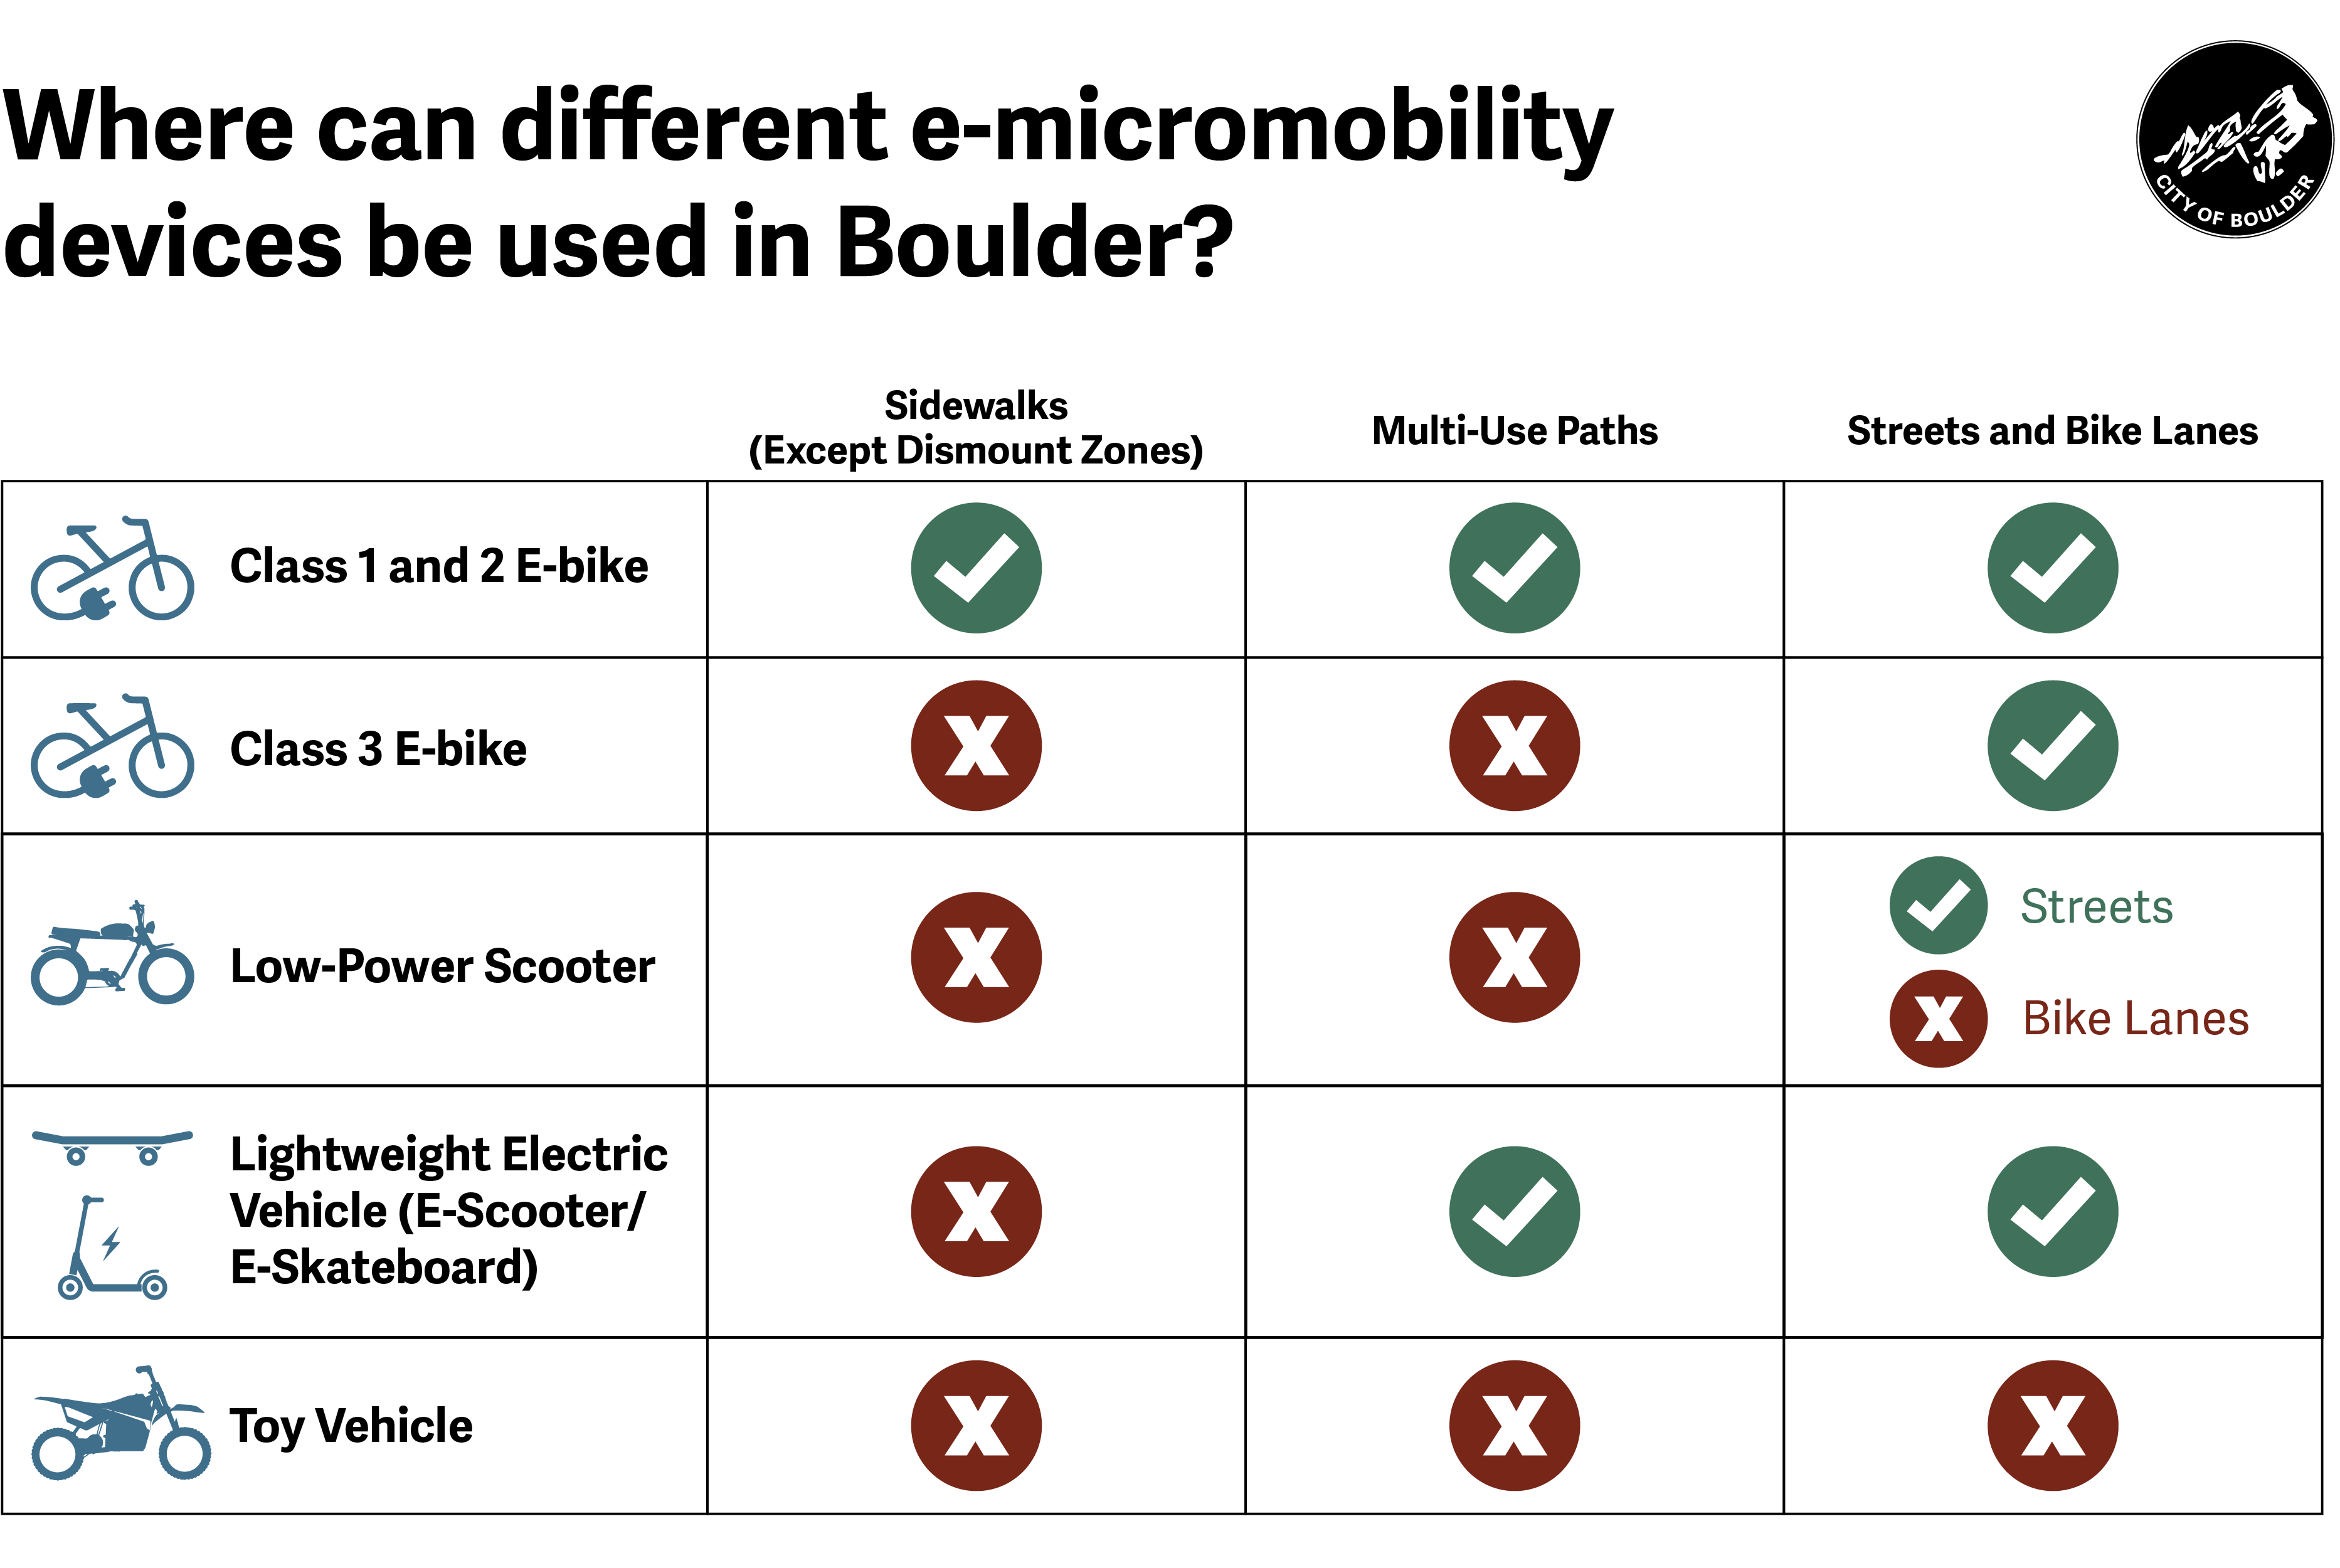 A chart of different e-micromobility devices and where they can be used in the City of Boulder